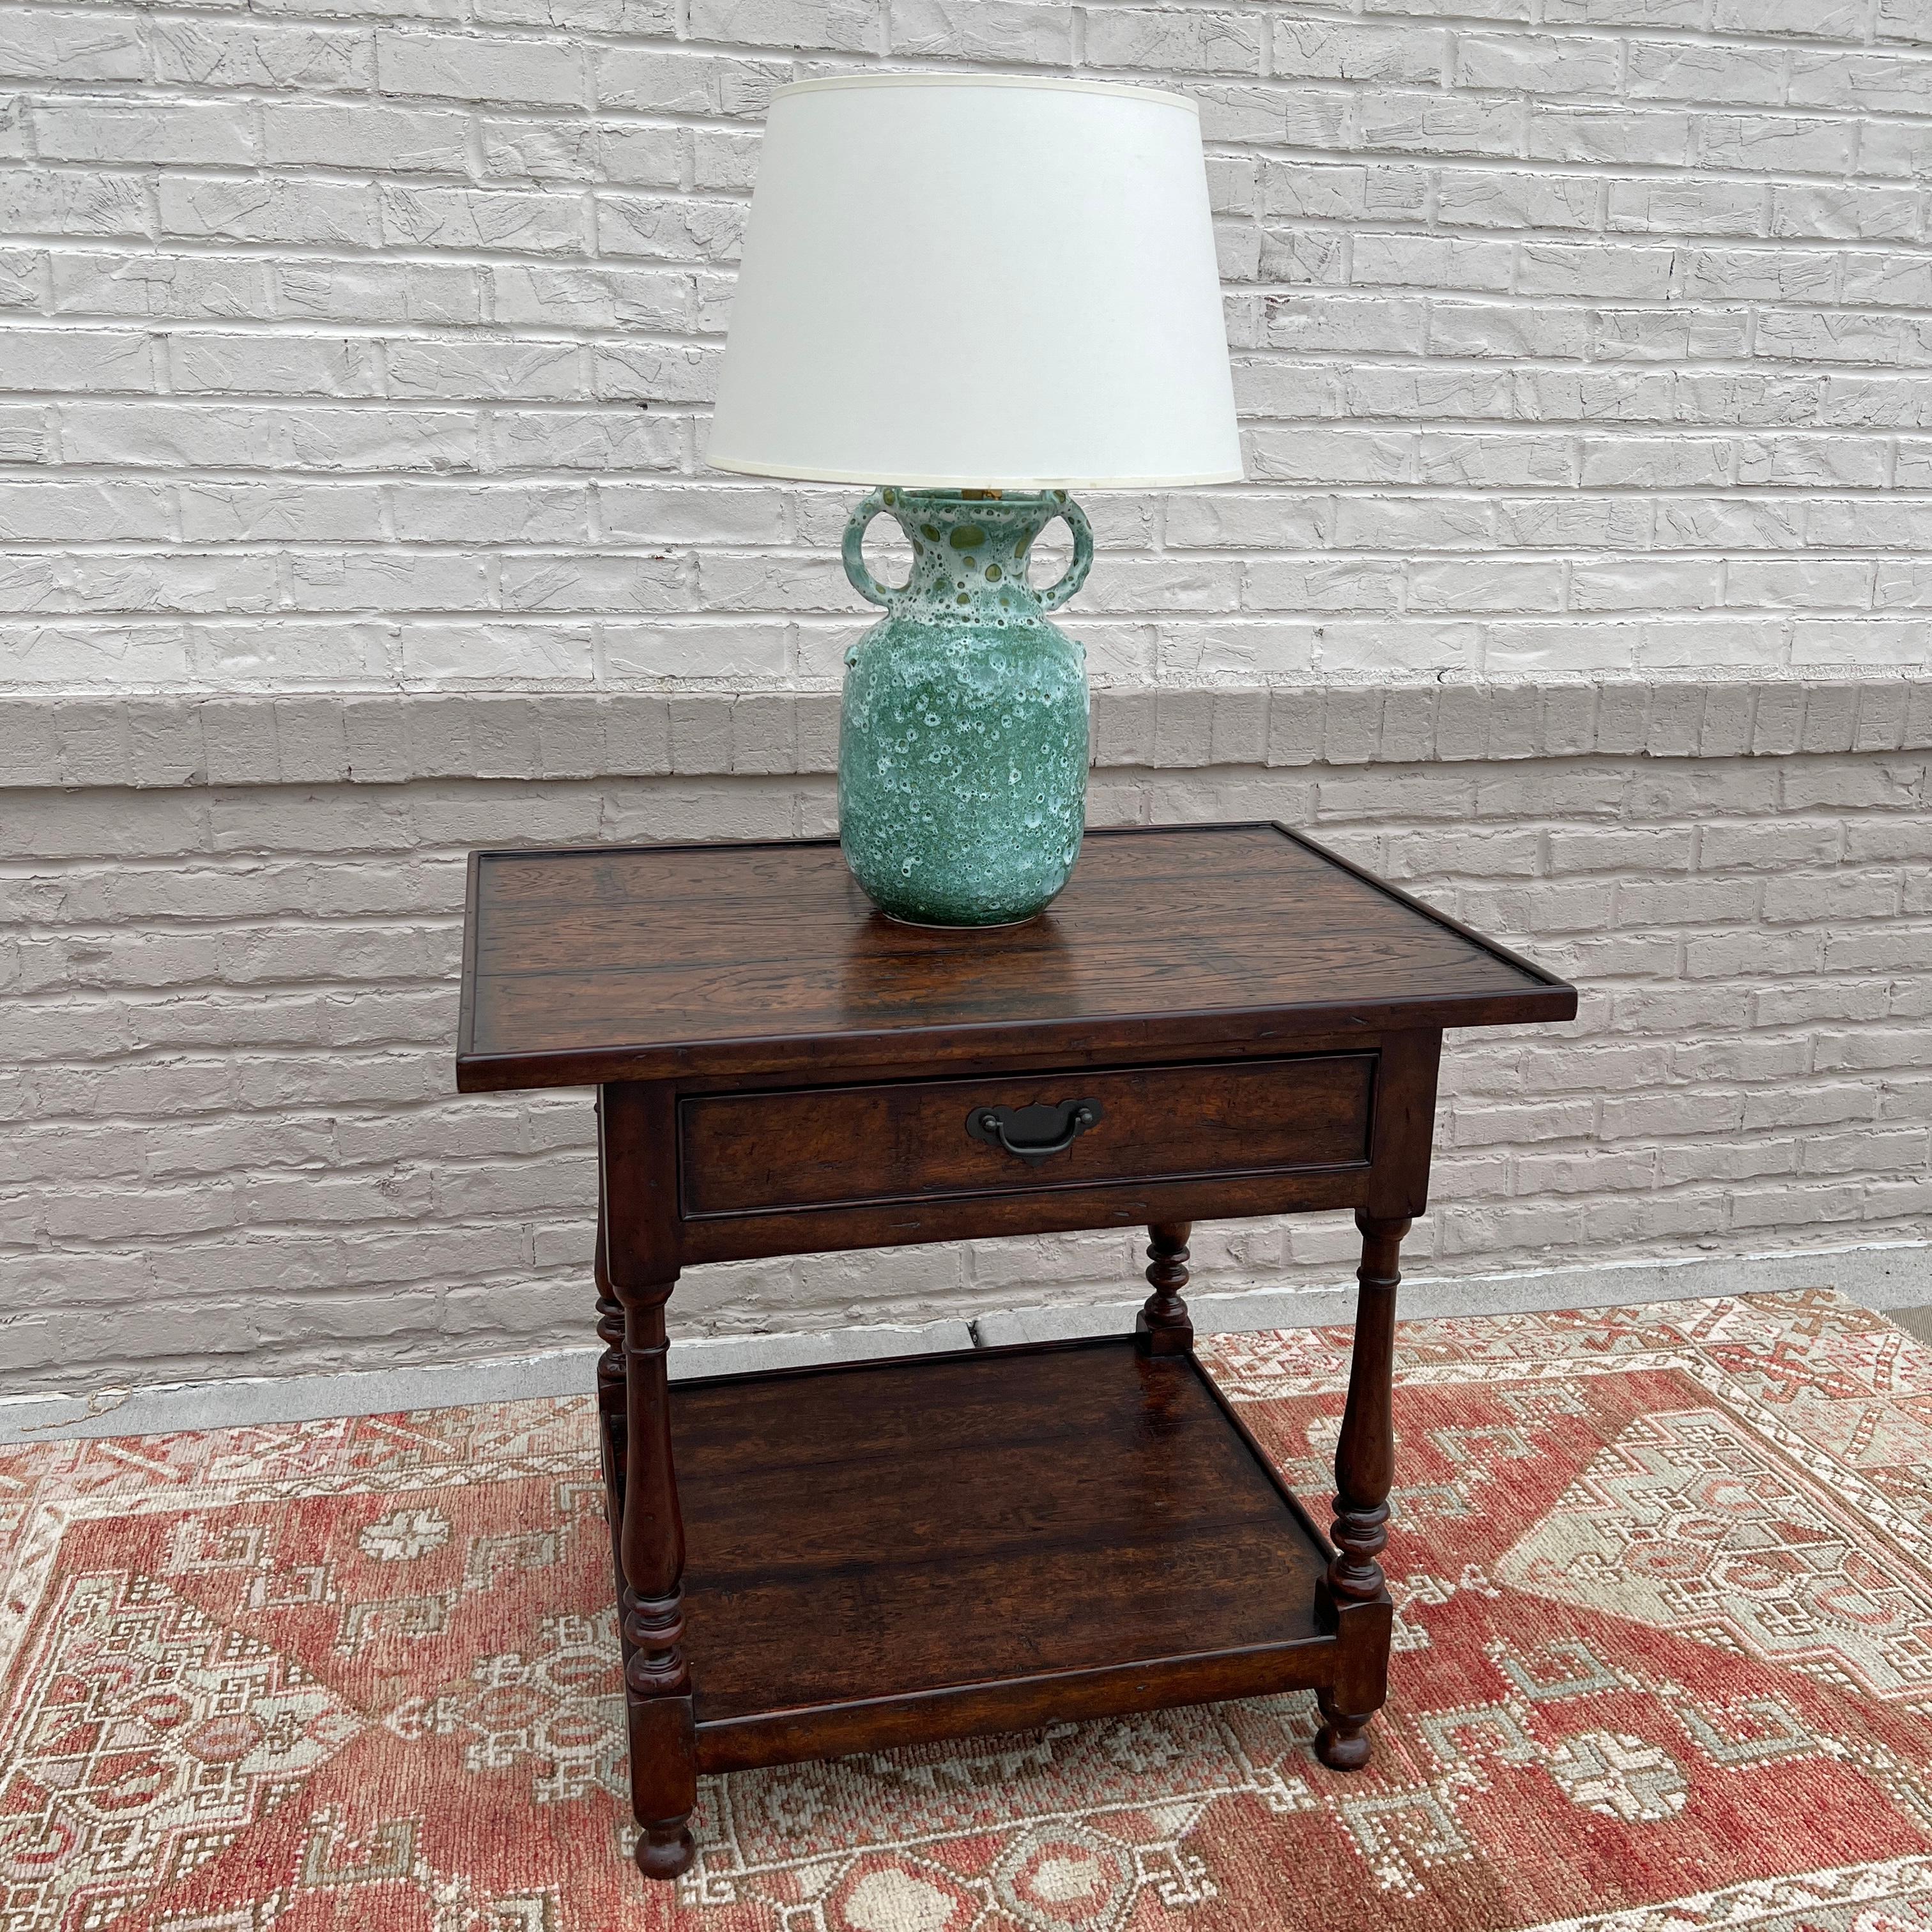 This table is showroom new and has never been used. 

A reclaimed oak veneered and mahogany accent table by Theodore Alexander. Features a planked top, functioning drawer, baluster turned legs and lower shelf. 

Dimensions: 30